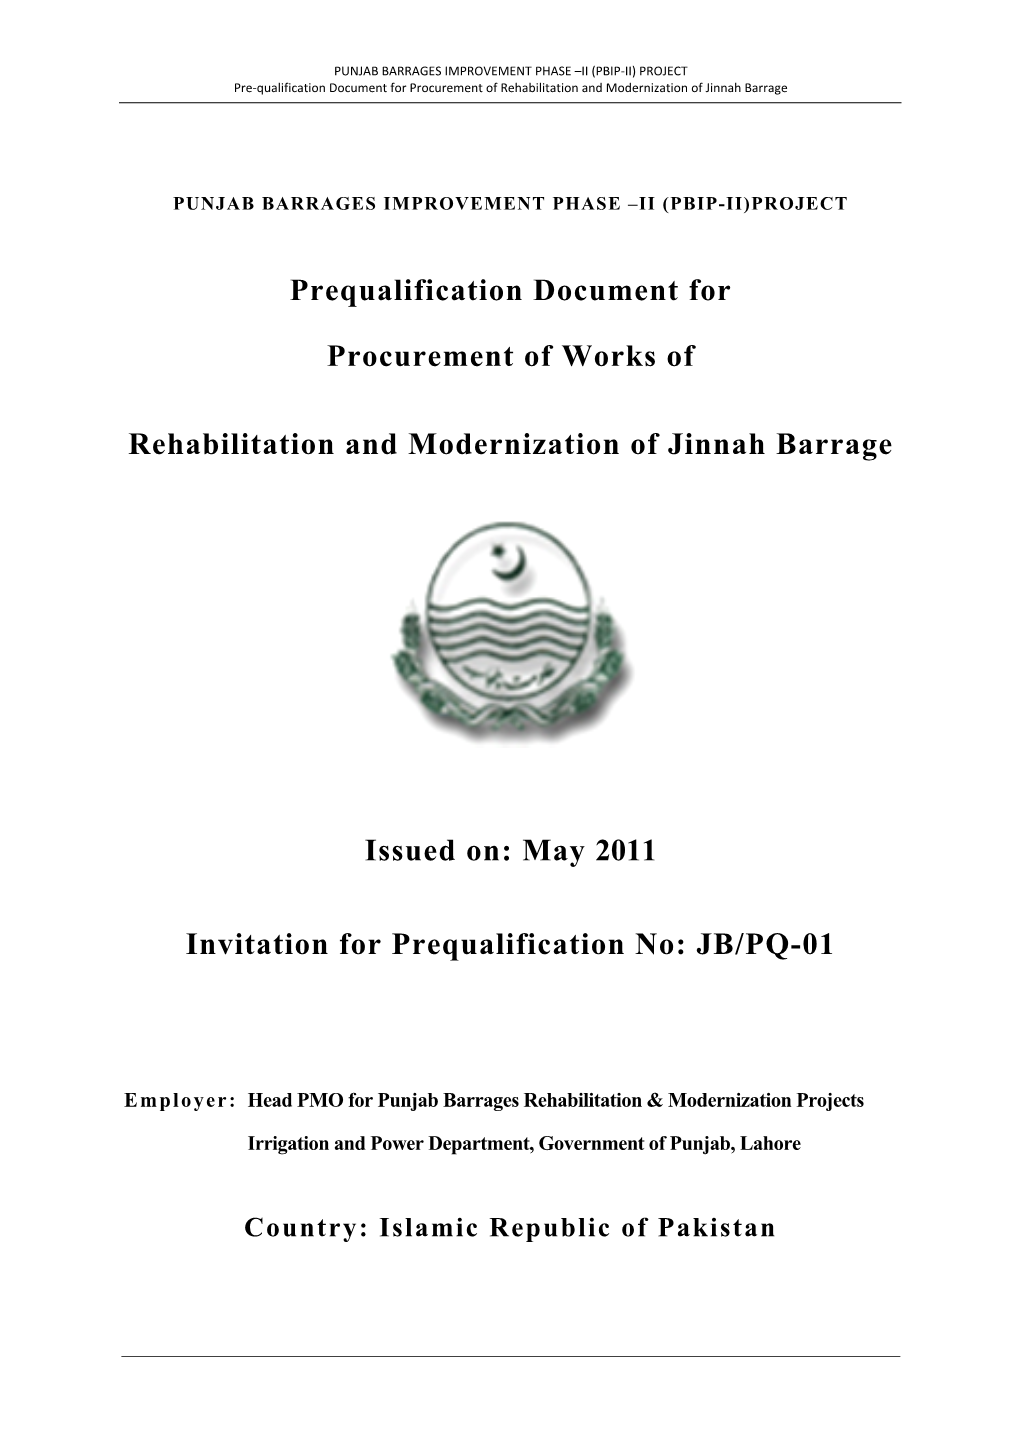 Prequalification Document for Procurement of Works Of